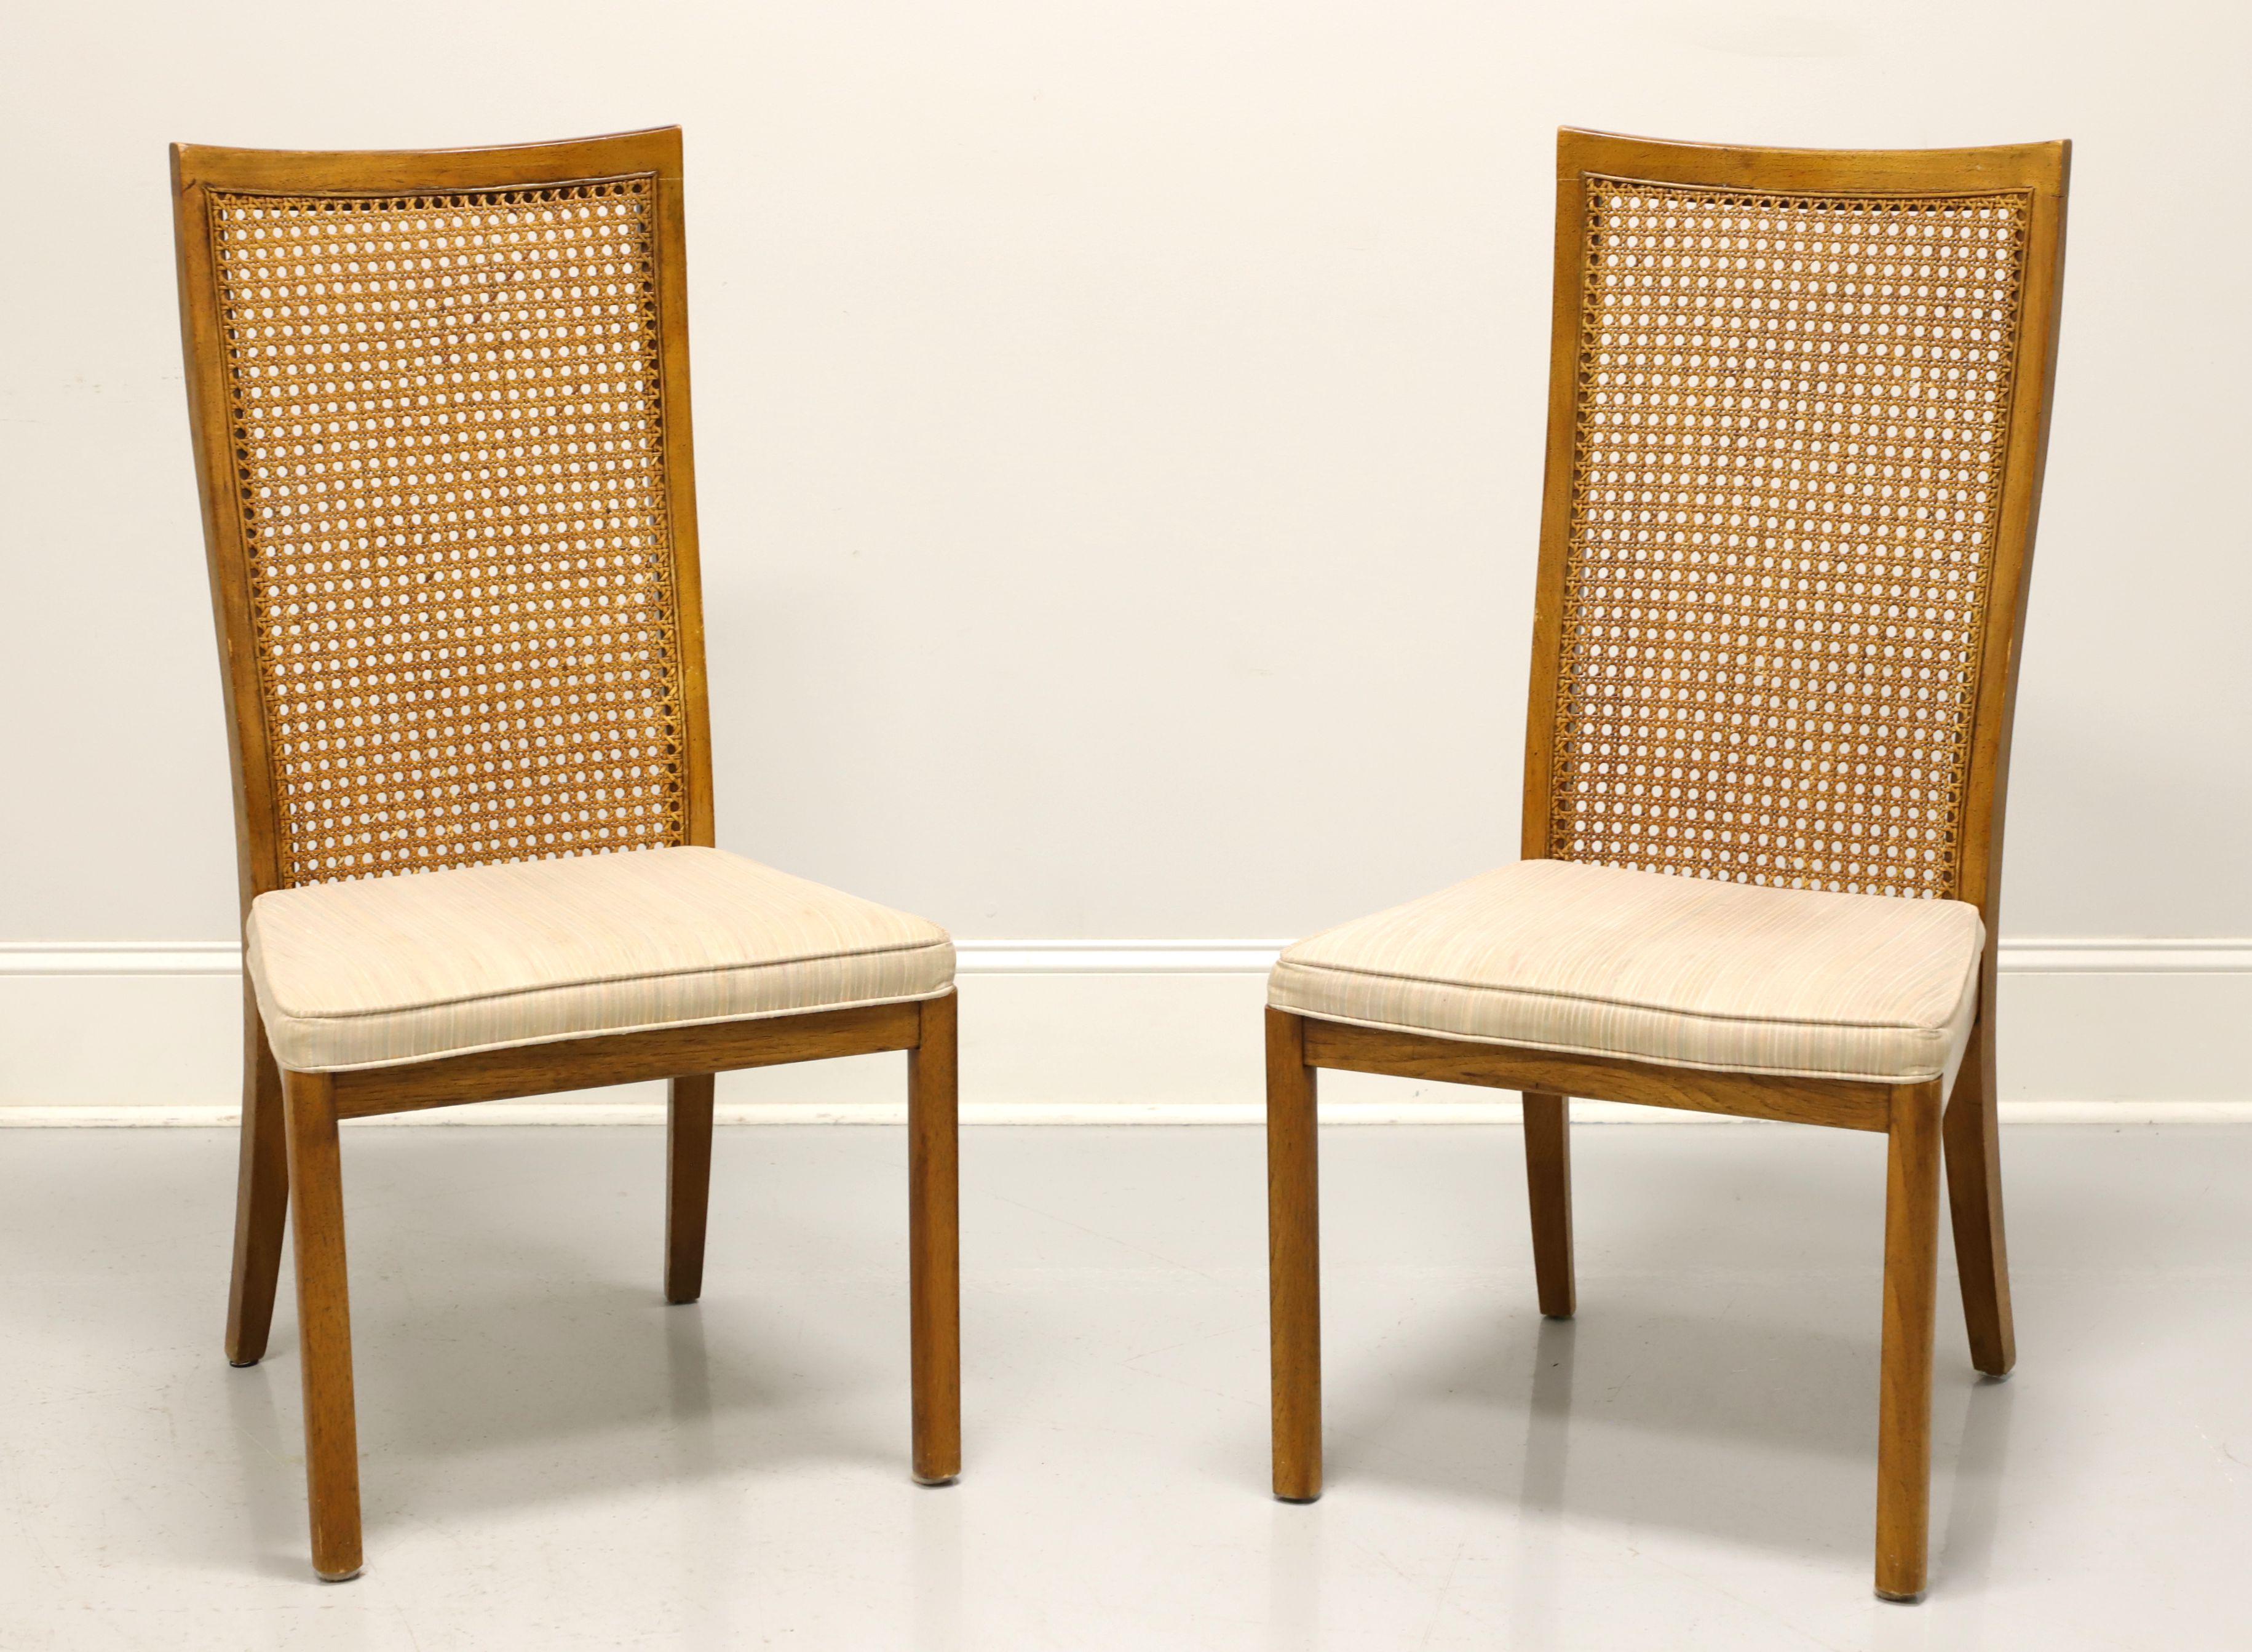 DREXEL Accolade Campaign Style Dining Side Chairs - Pair B 4